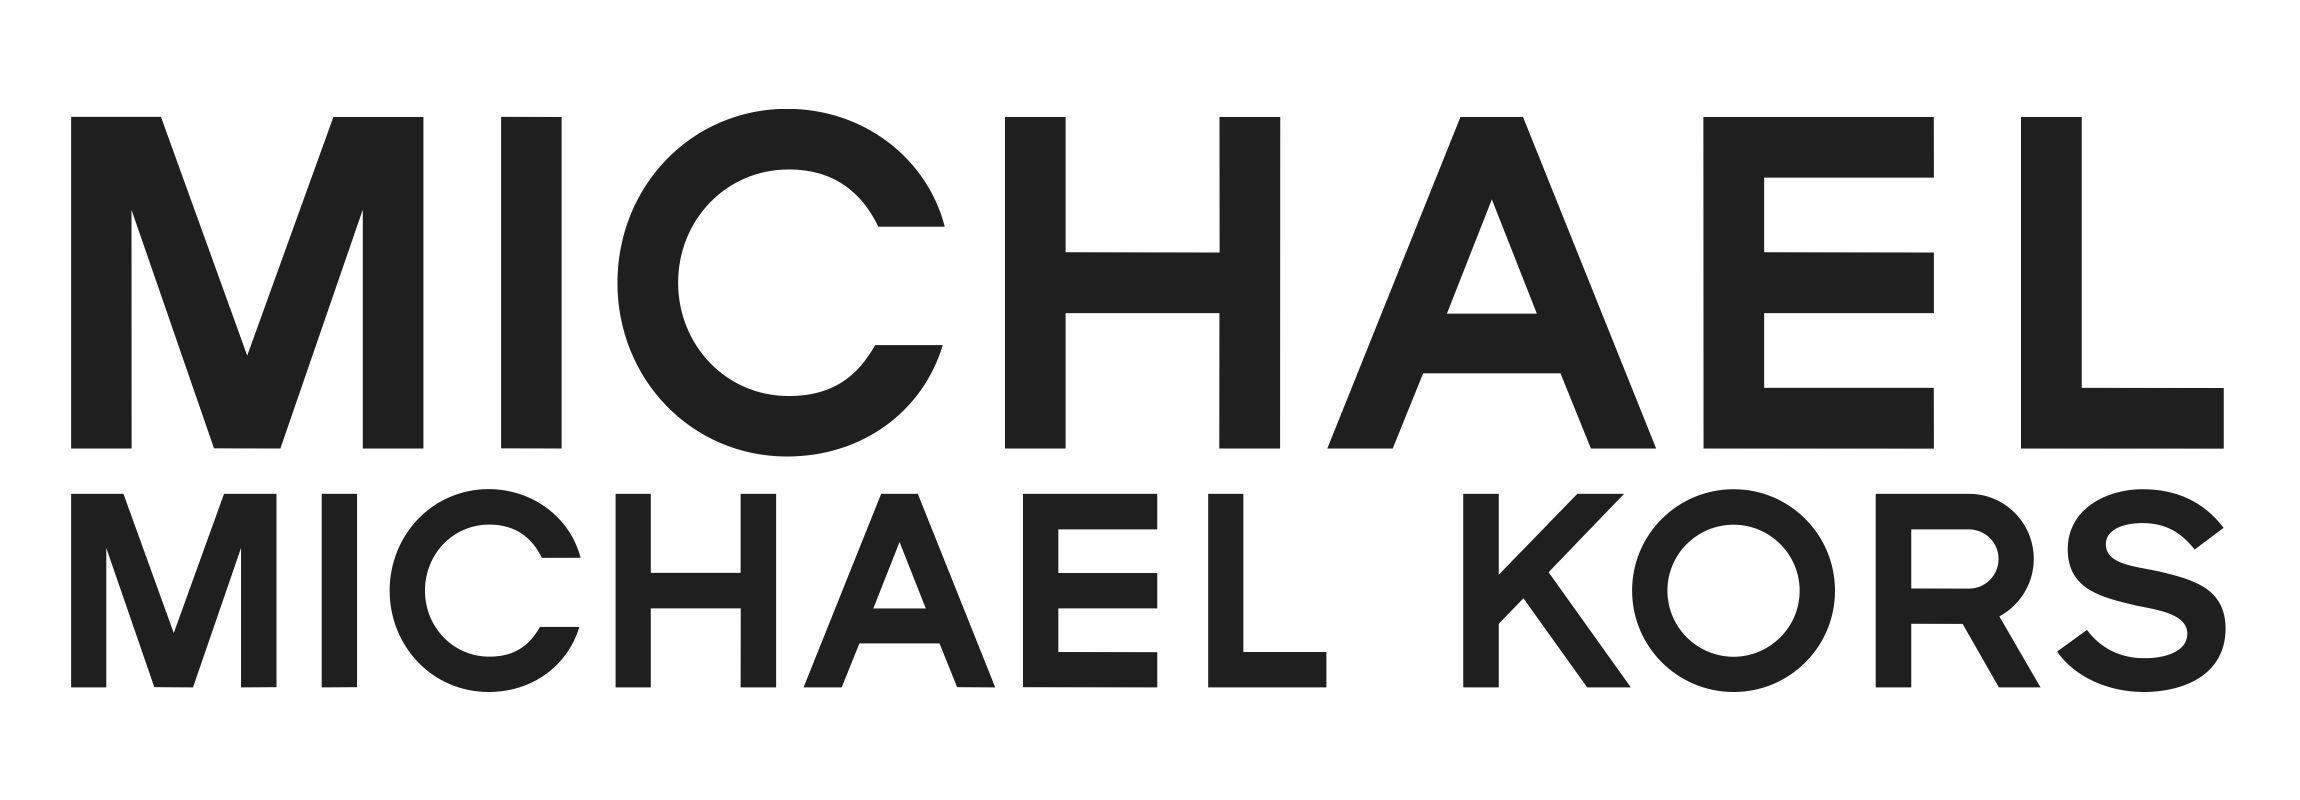 Micheal Kors Logo - Michael Kors Logo, Michael Kors Symbol, Meaning, History and Evolution